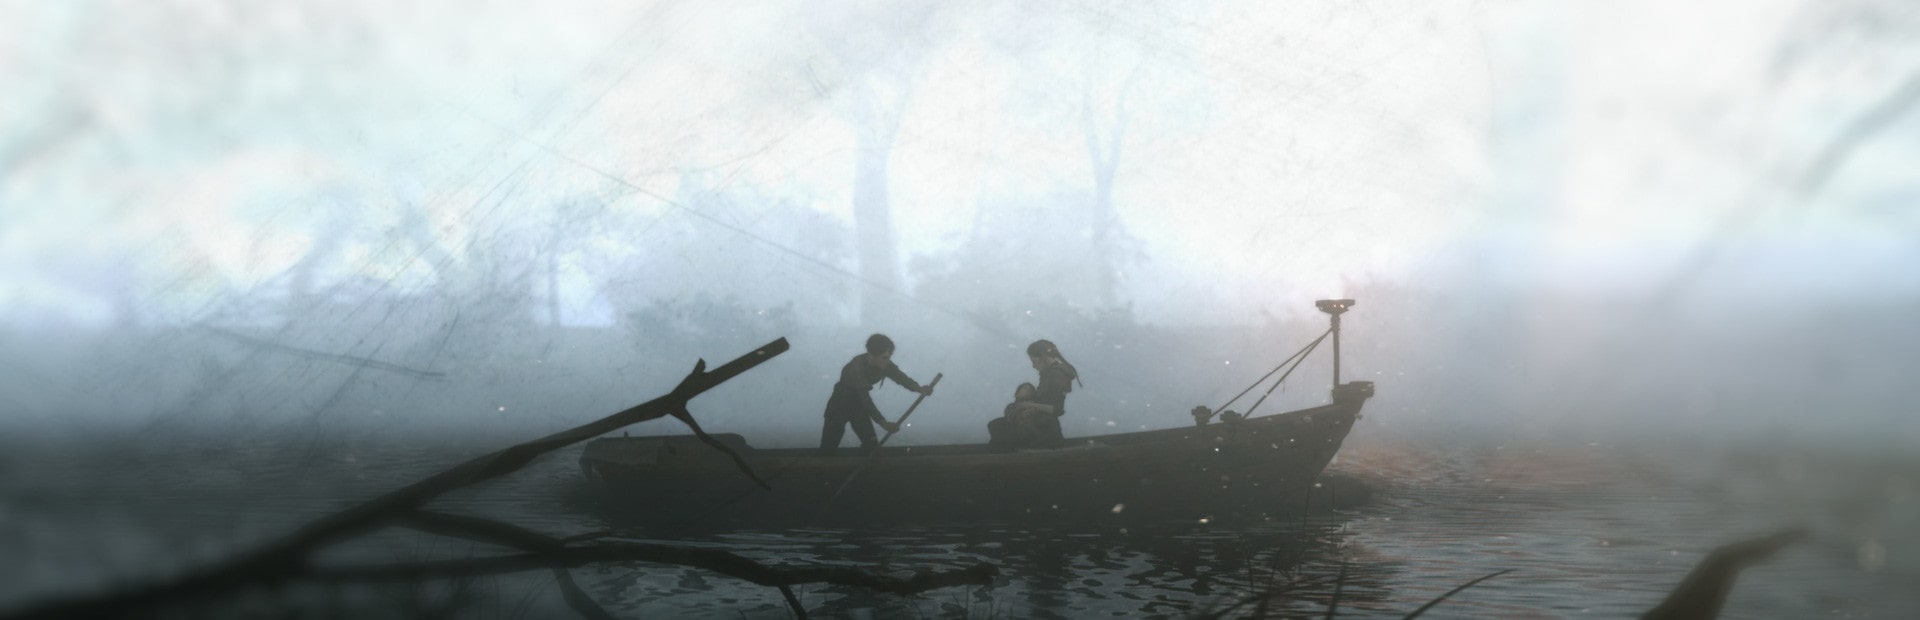 A Plague Tale: Innocence Review - A Somber Tale